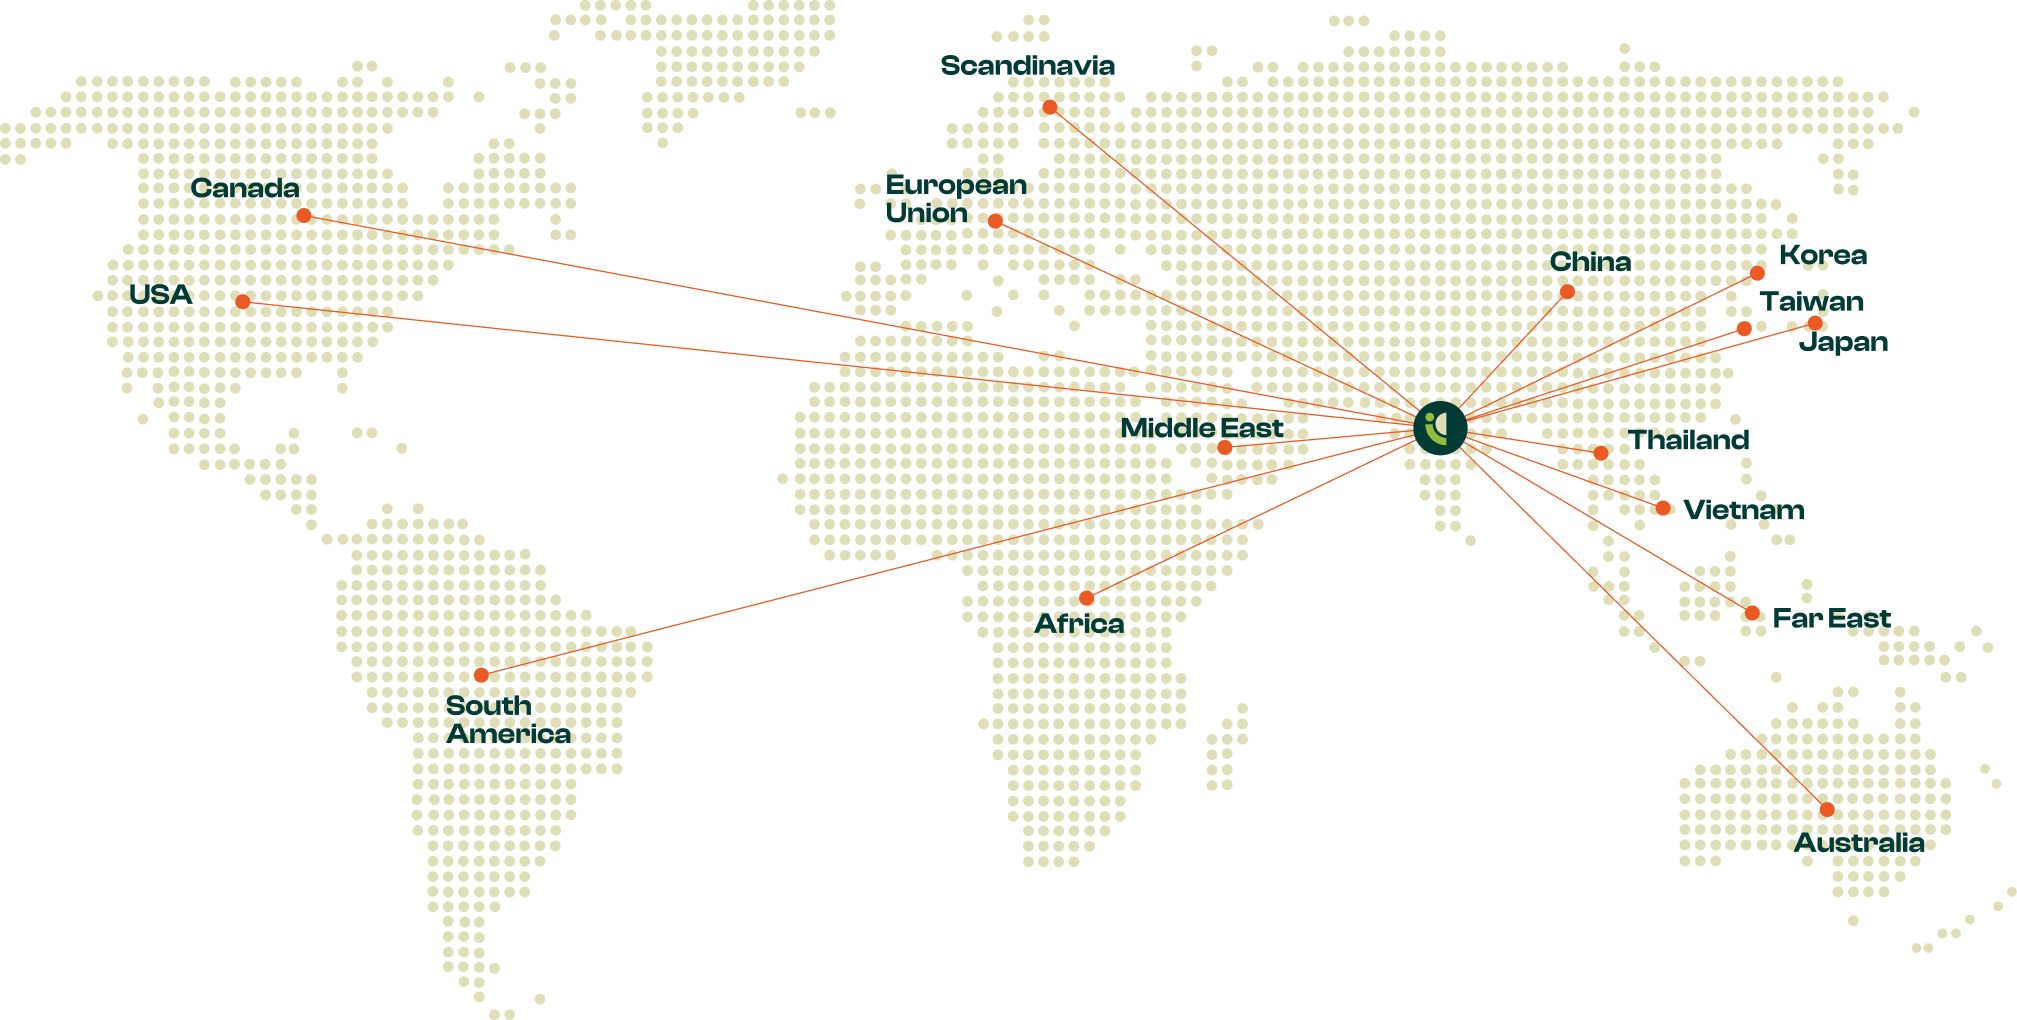 World Map with location pointers showing company operations